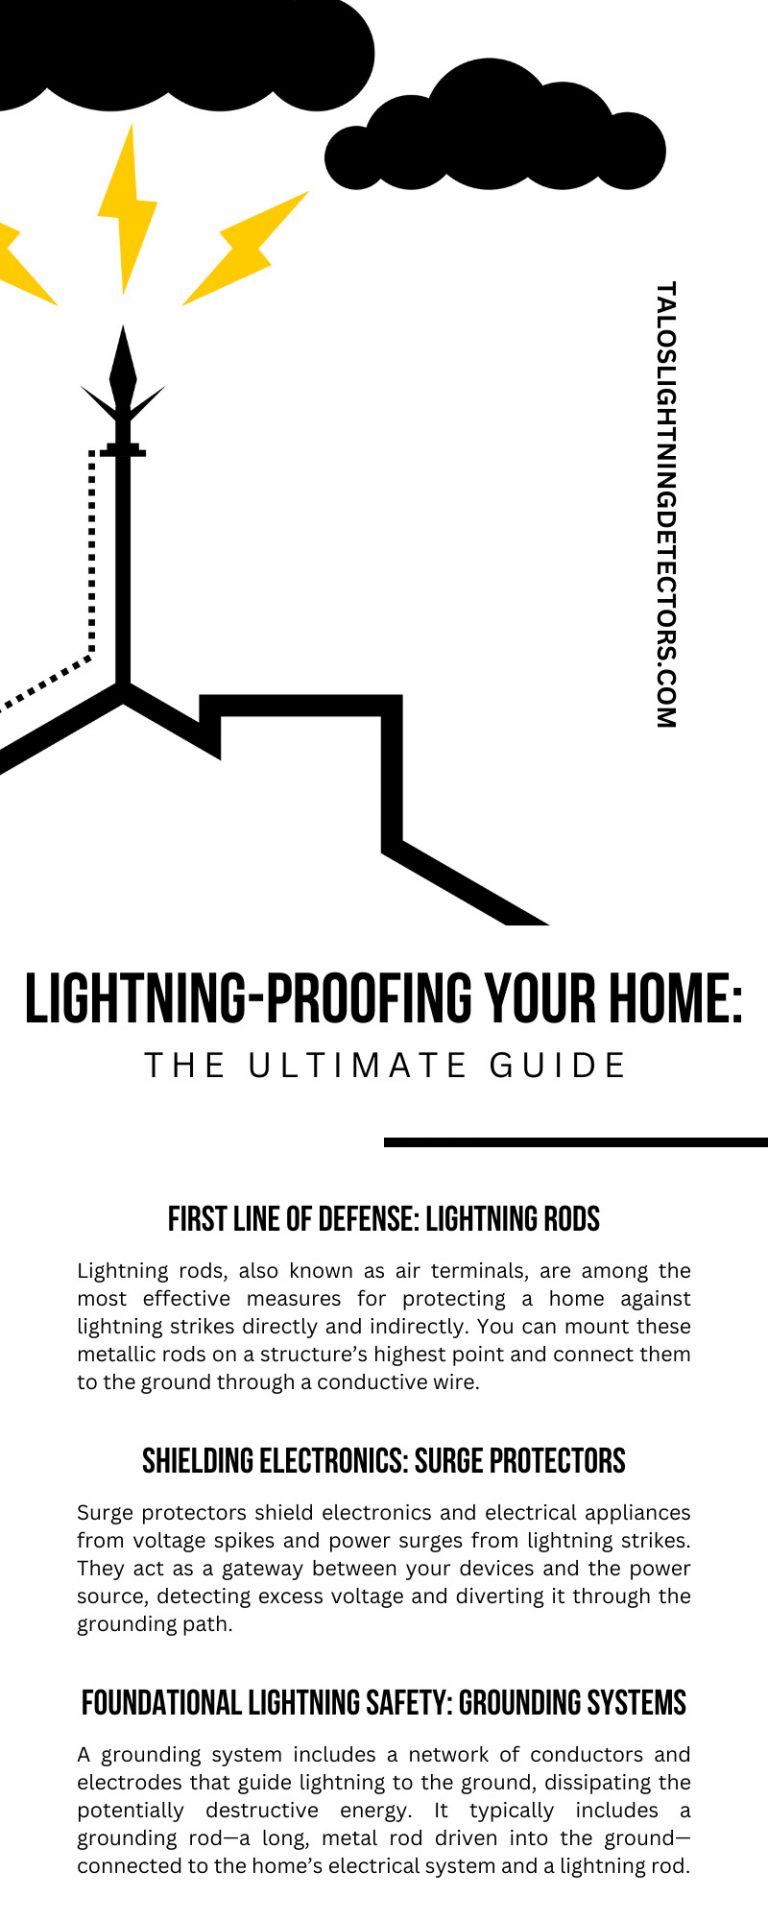 Lightning-Proofing Your Home: The Ultimate Guide